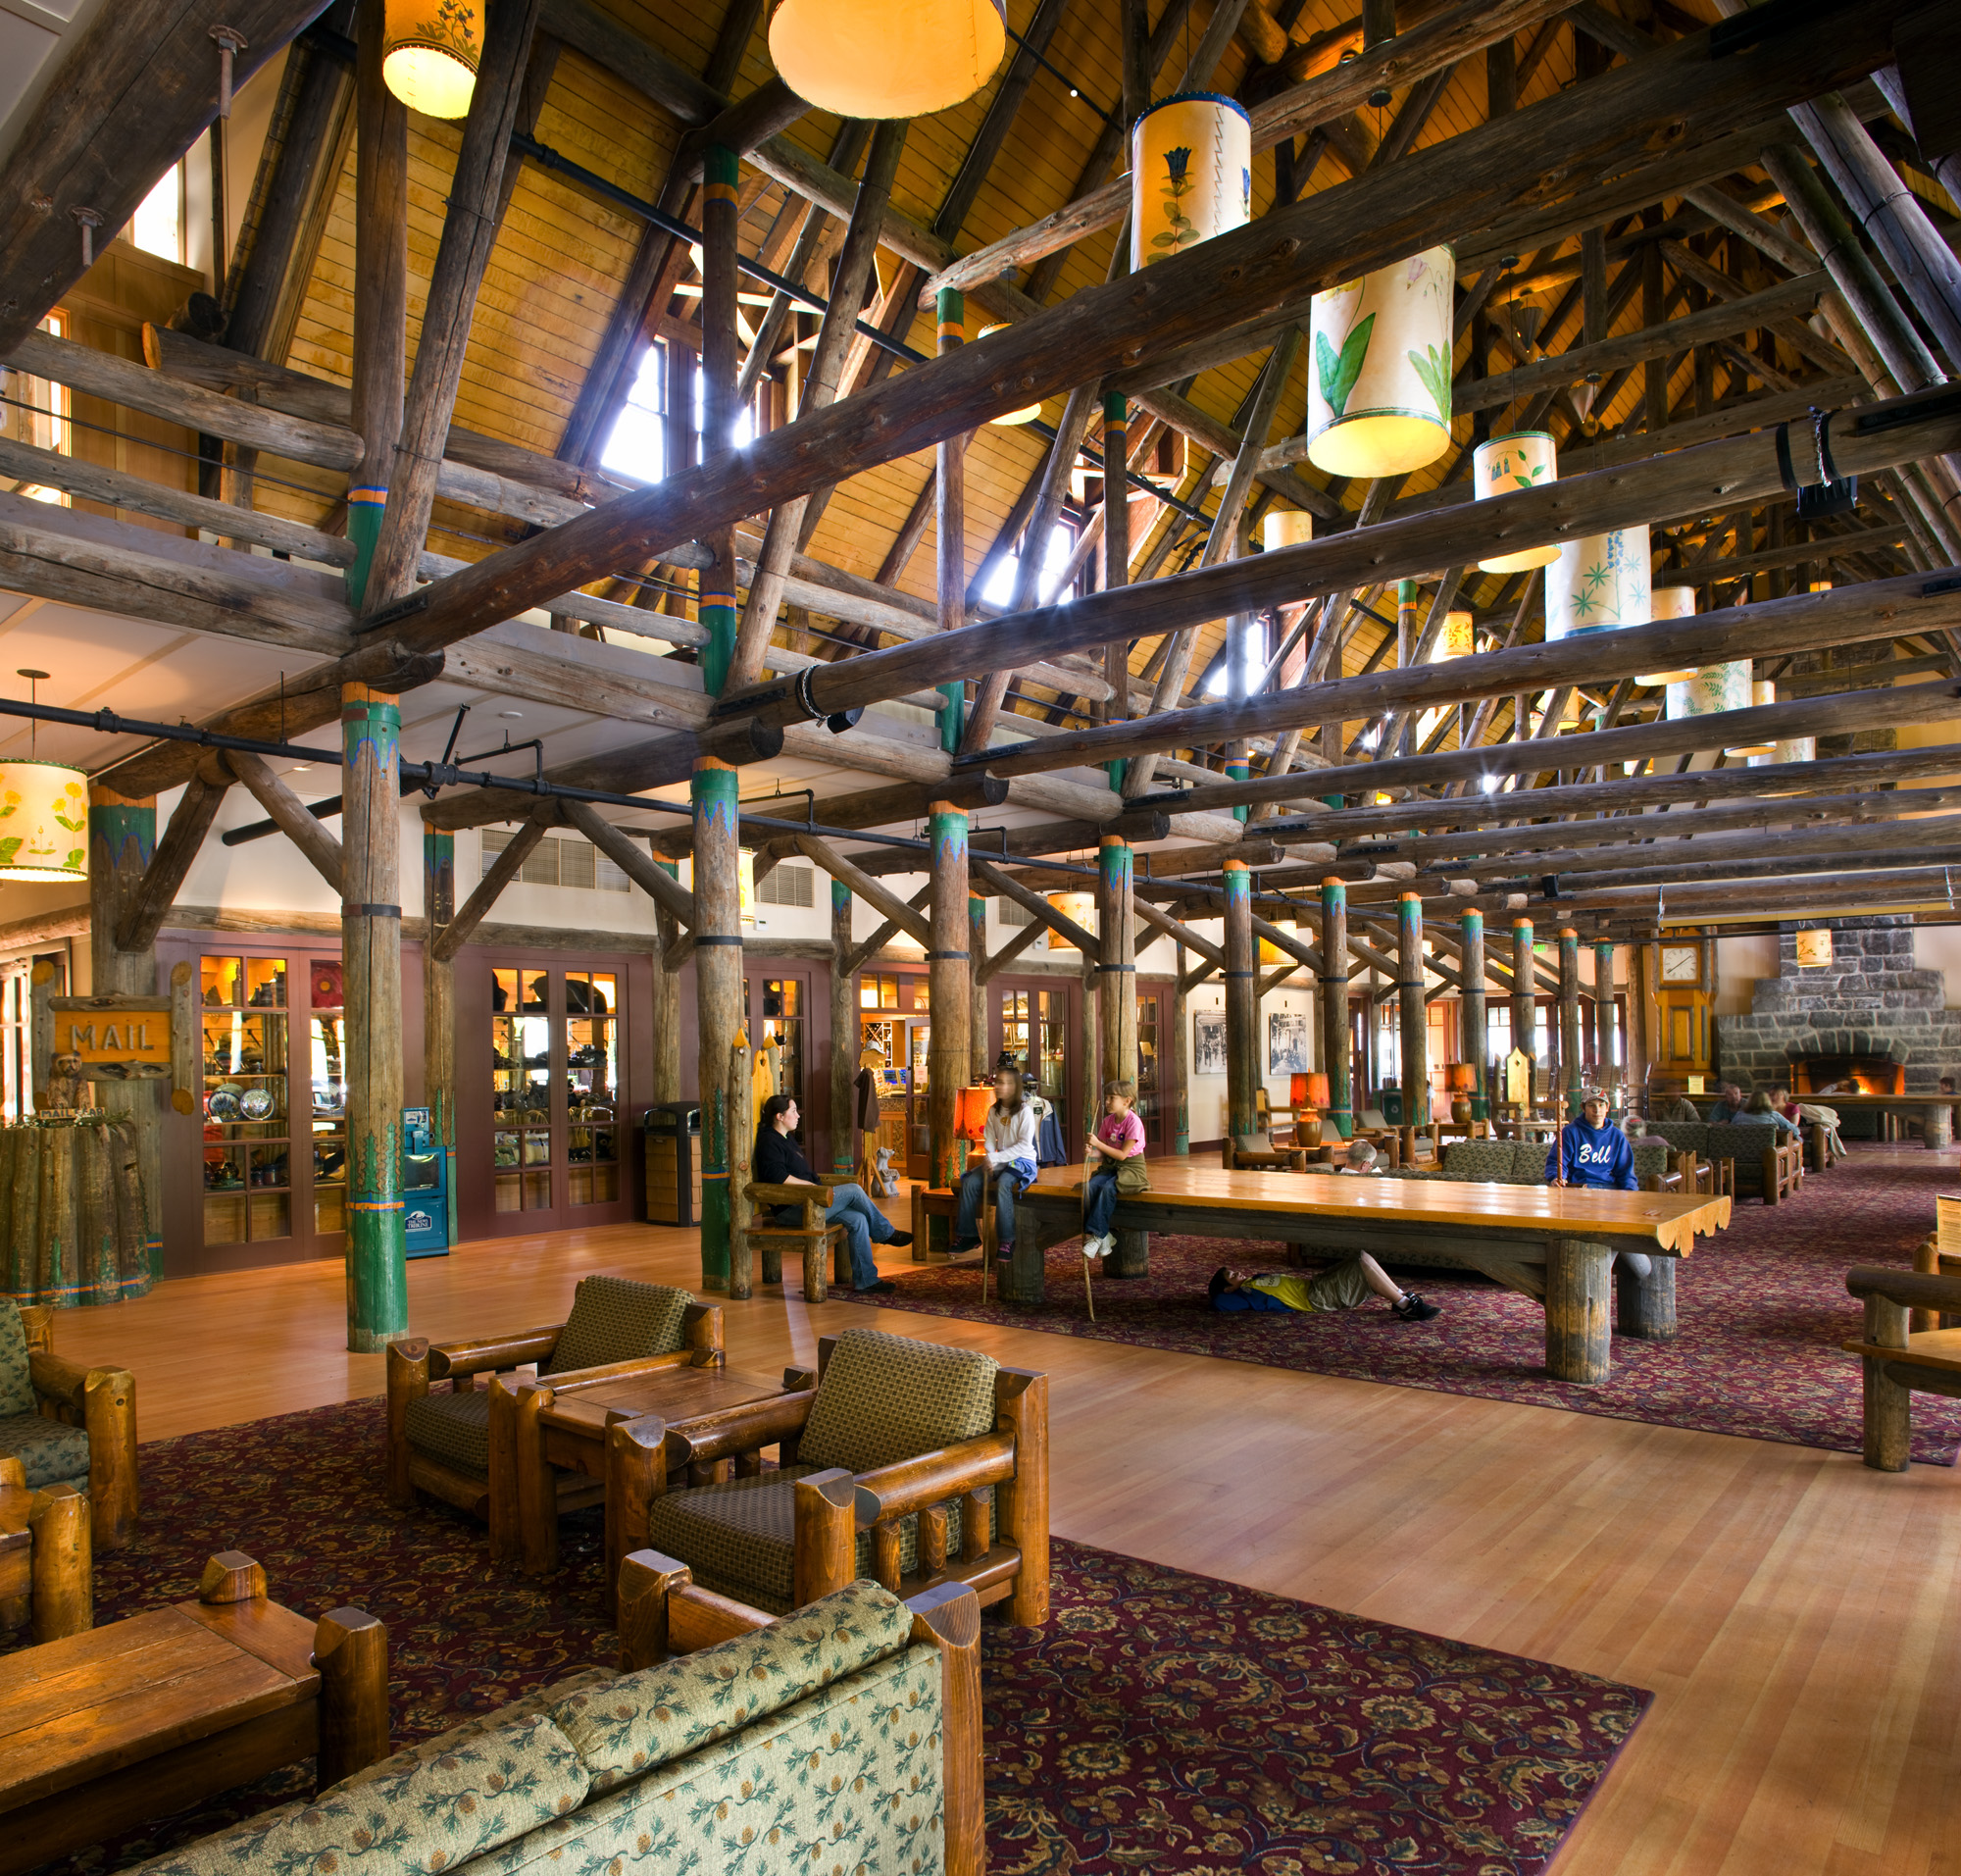 interior lobby of the Mt. Rainer Lodge. Large beams exposed revealing an expansive roof. Lobby is filled with comfortable seating and happy guests